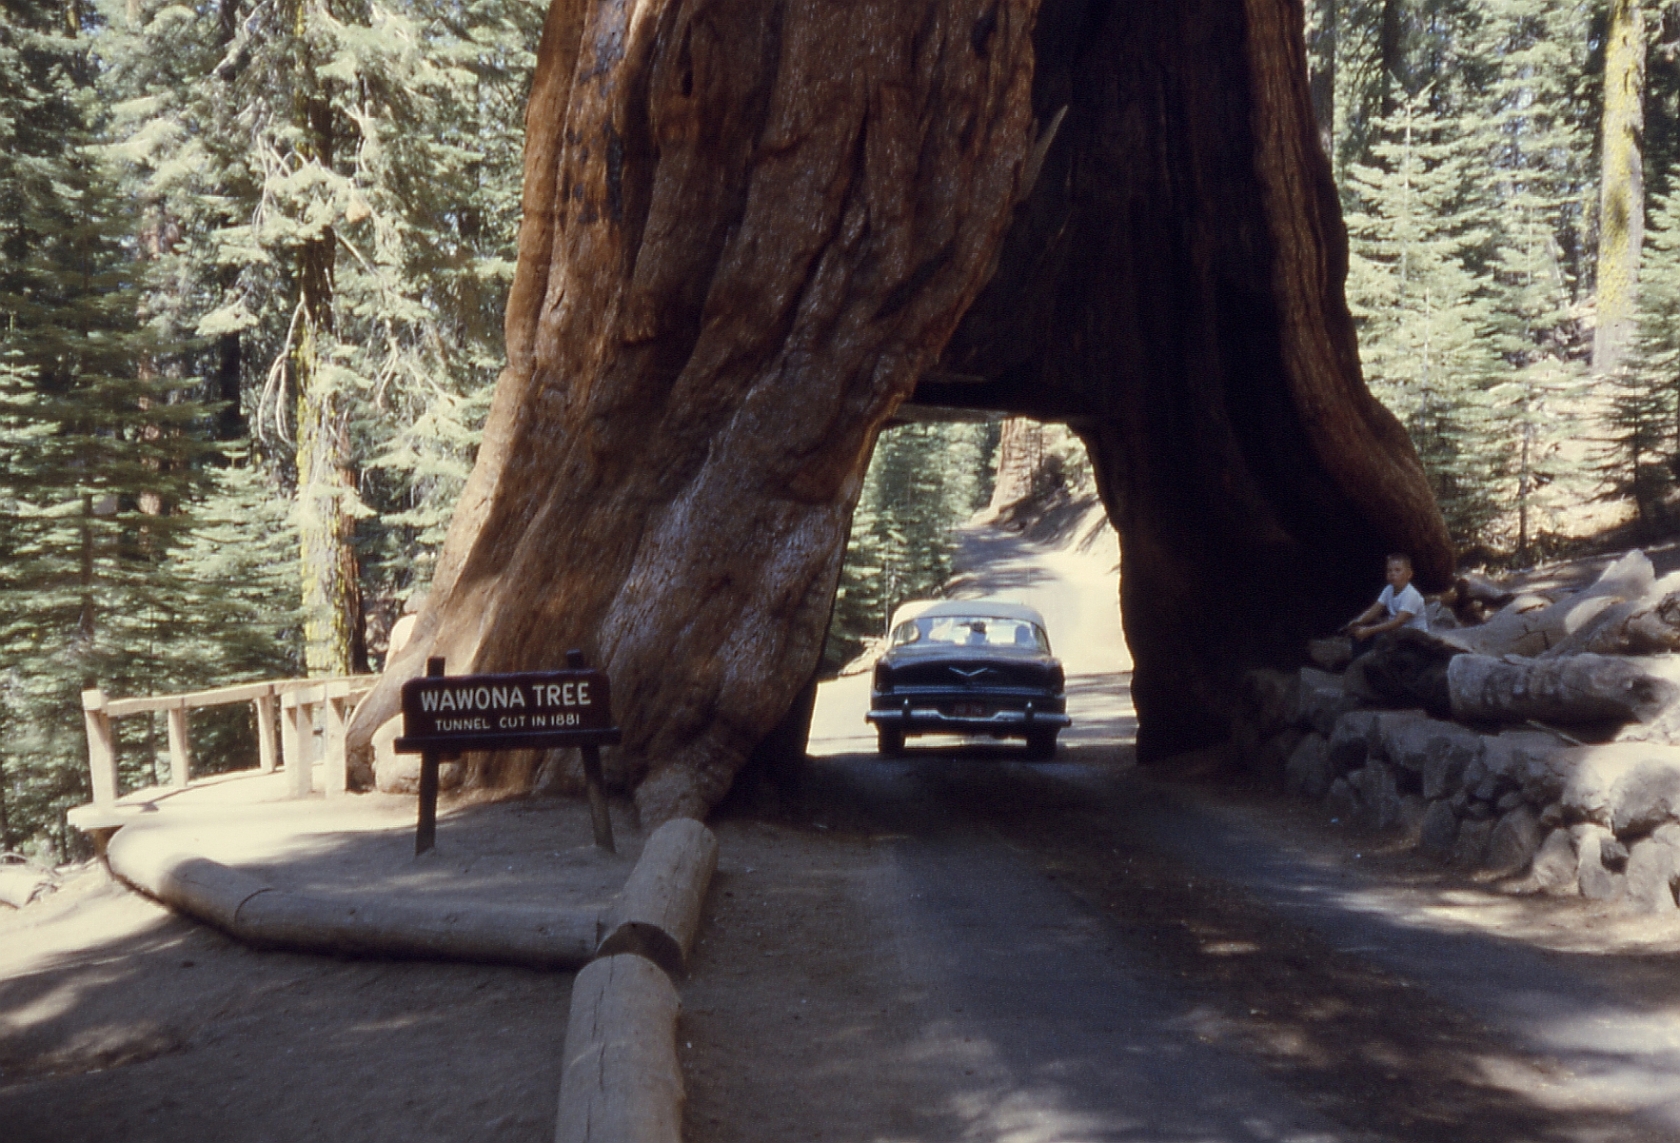 Tunnel tree in Yosemite is an age-old tradition in this national park.